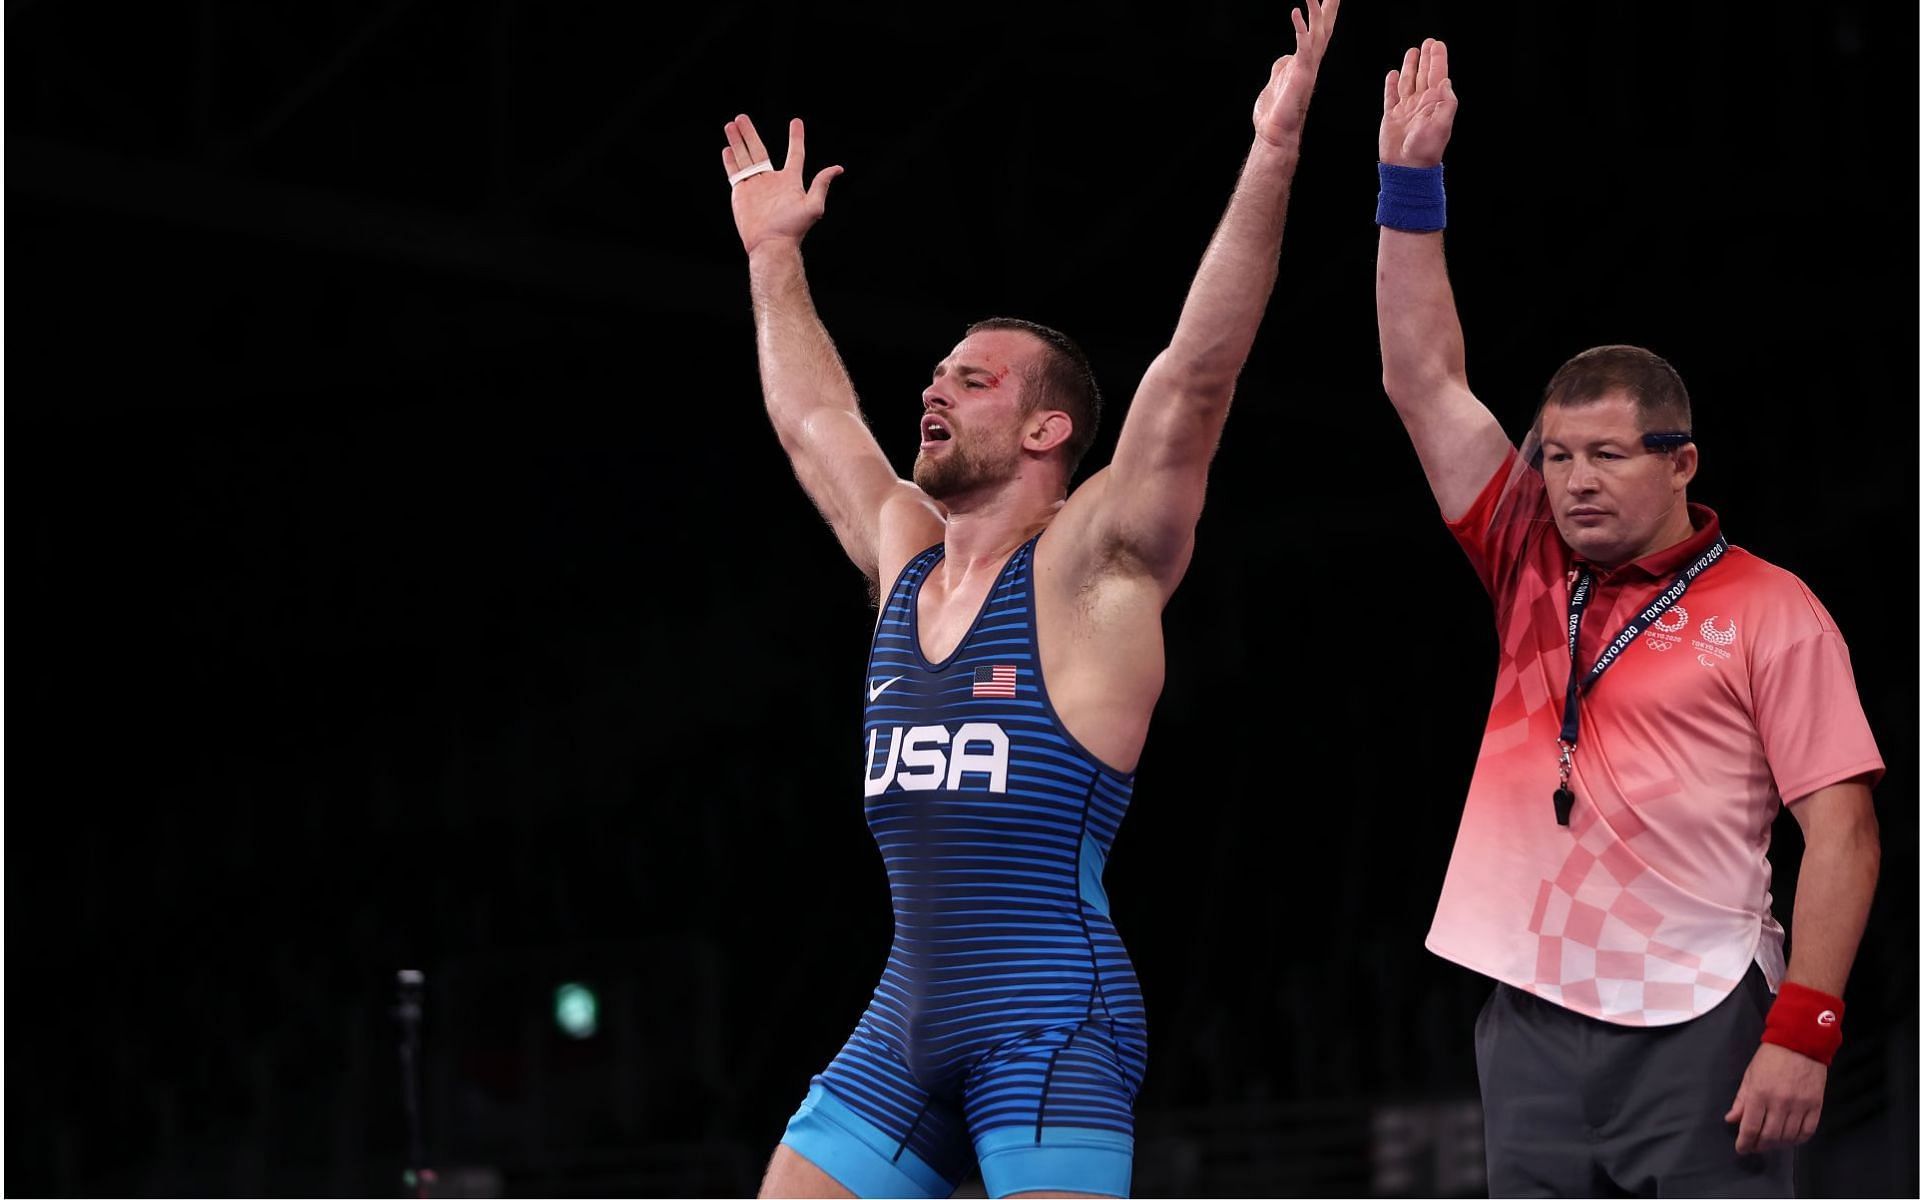 2020 Olympic gold medalist in freestyle wrestling David Taylor after winning the Olympic finals